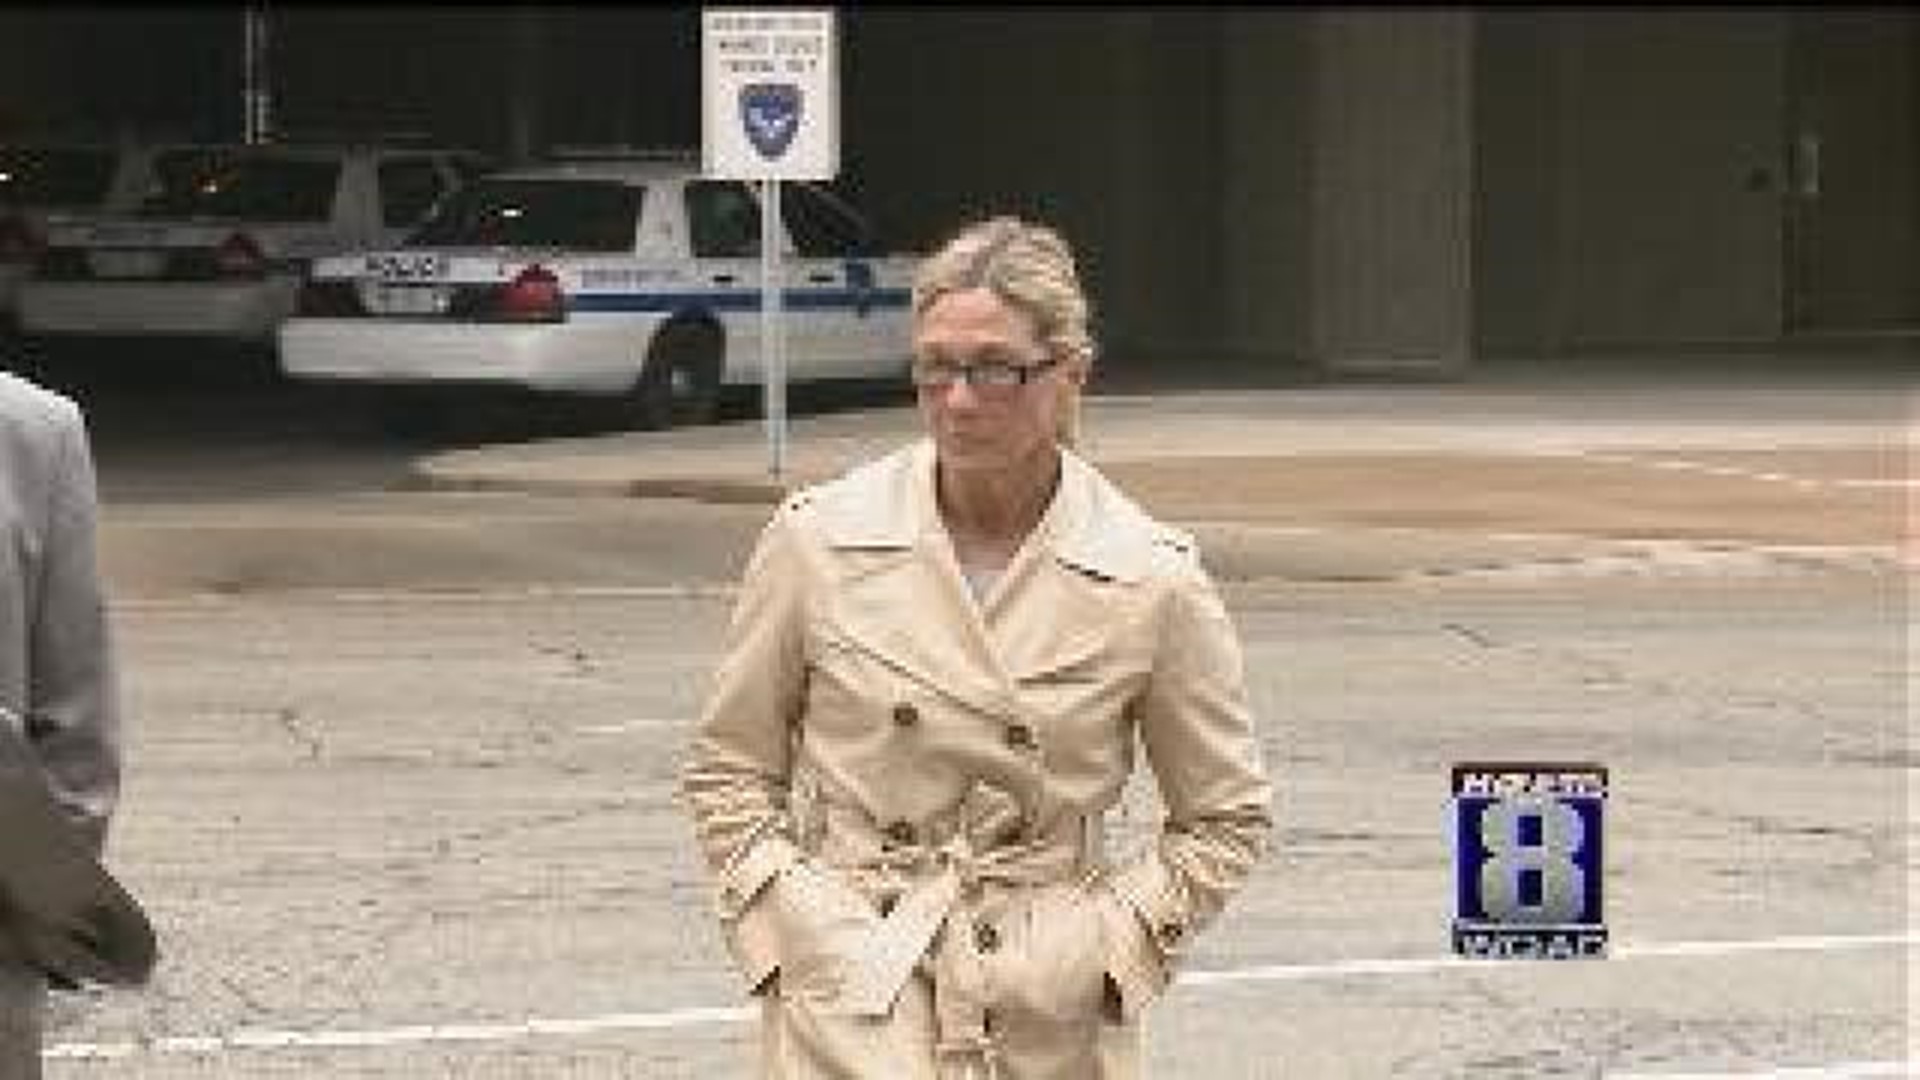 Law firm hired to recover assets in Dixon’s Rita Crundwell investigation